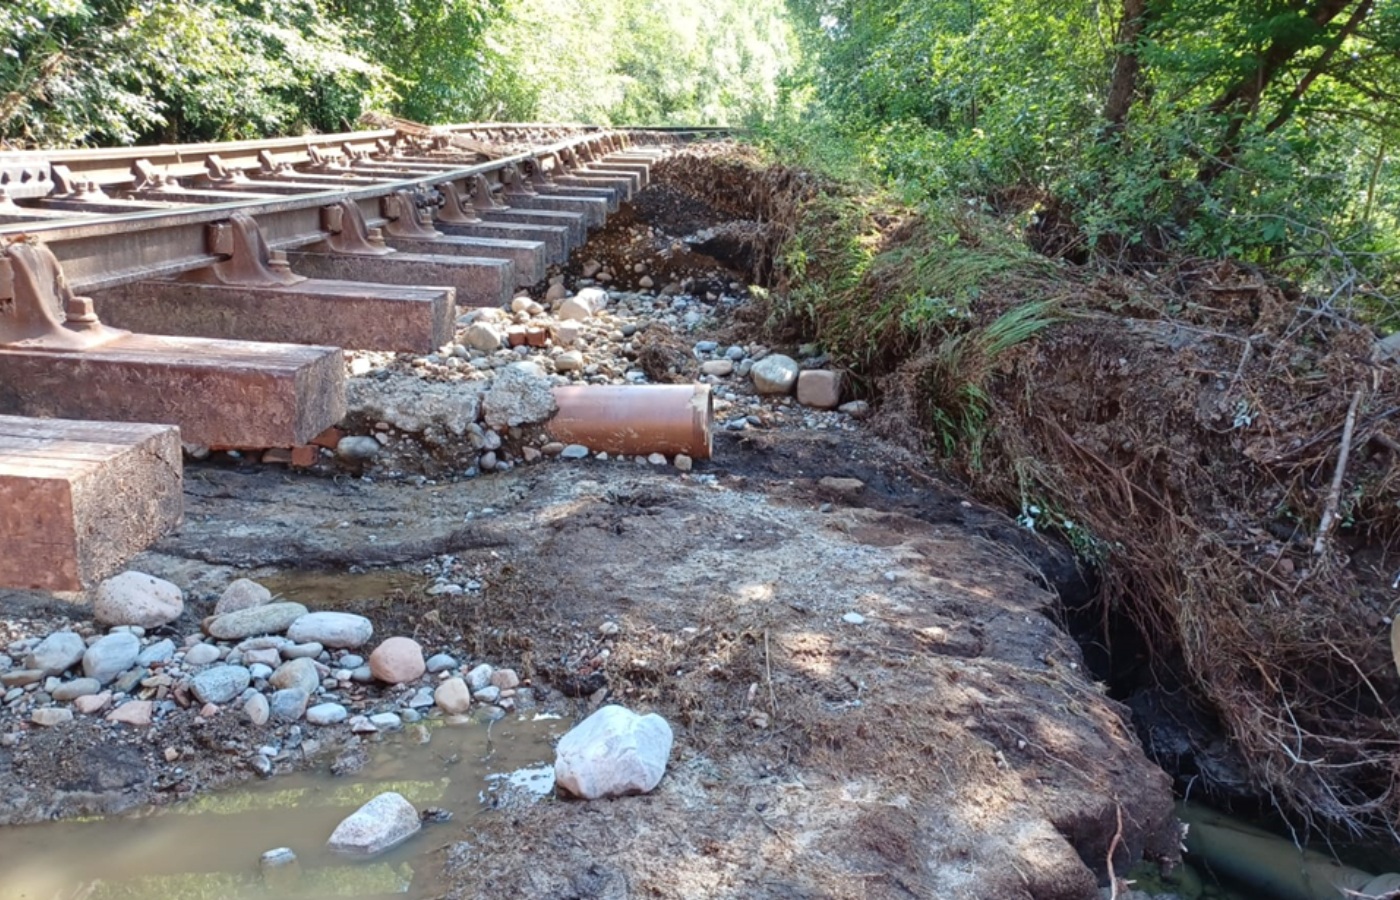 More than 400 tonnes of material had been washed away from under the track as a result of flash-flooding